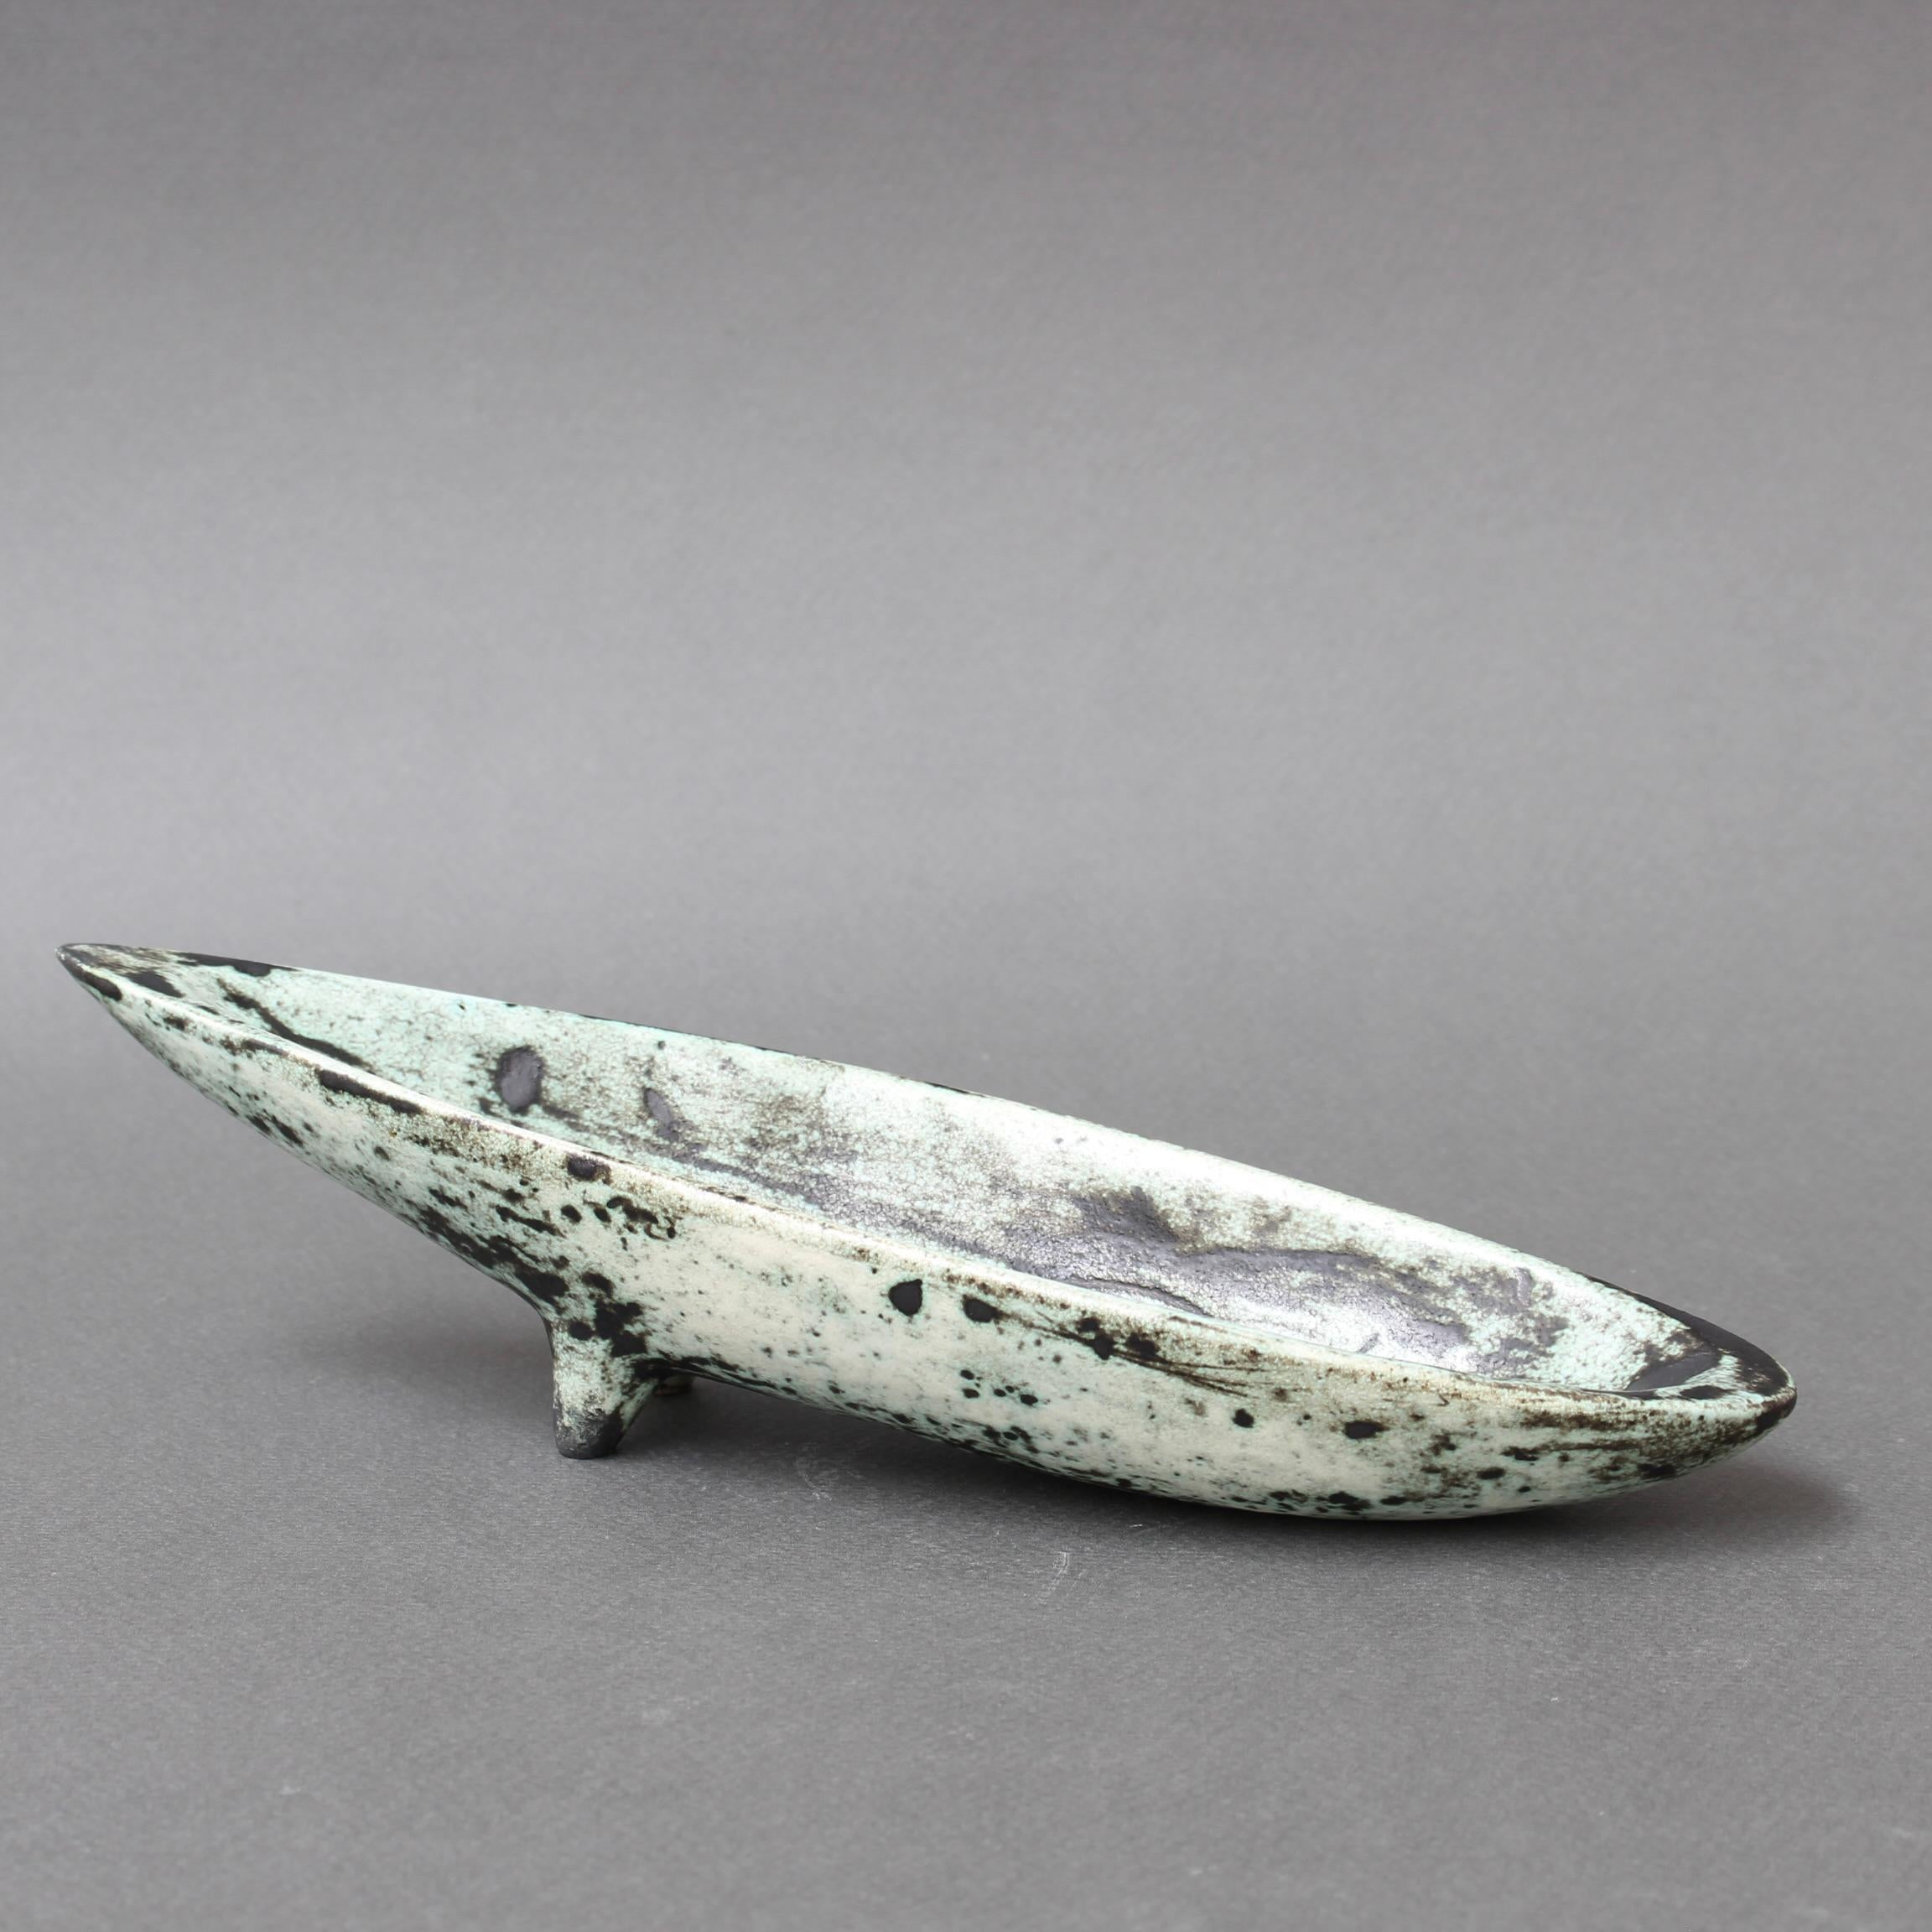 French vintage ceramic, canoe-shaped dish by Jacques Blin (circa 1965). Blin's trademark cloudy glaze surrounds a sgraffito image of a bird - seemingly from an undiscovered primeval cave - which is featured in the centre of the dish. Whimsically